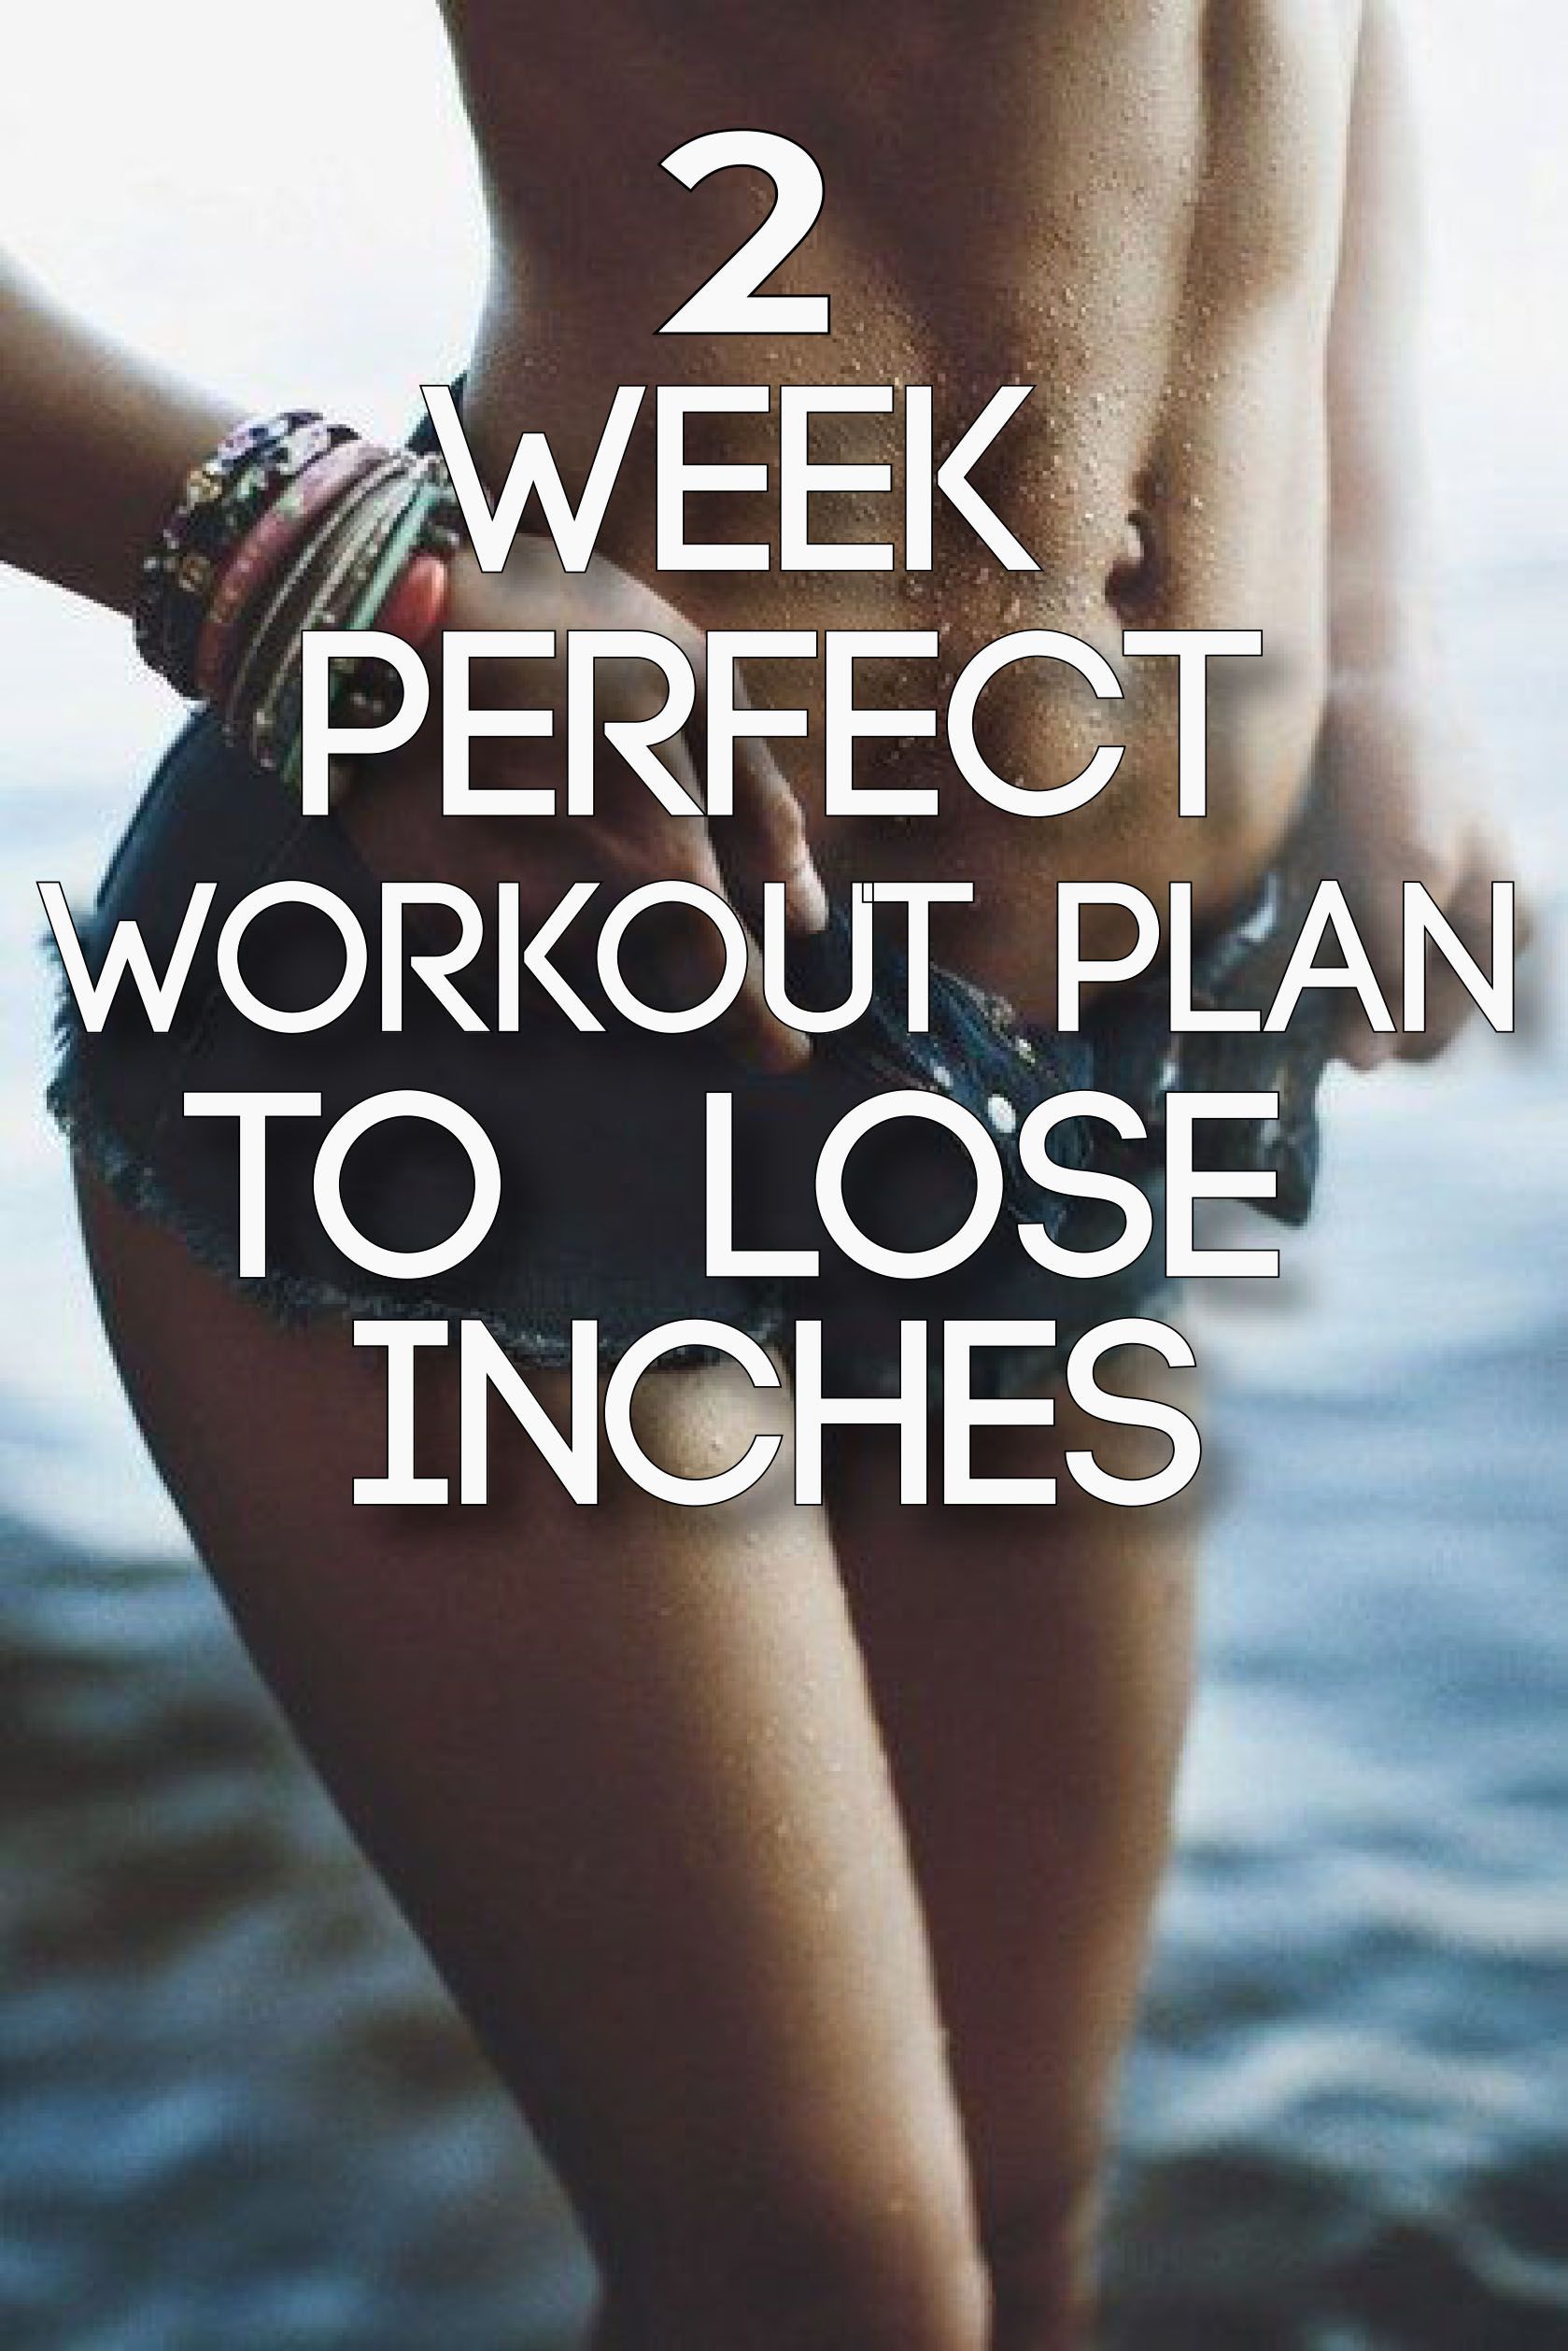 2-Week Perfect Workout Plan To Lose Inches